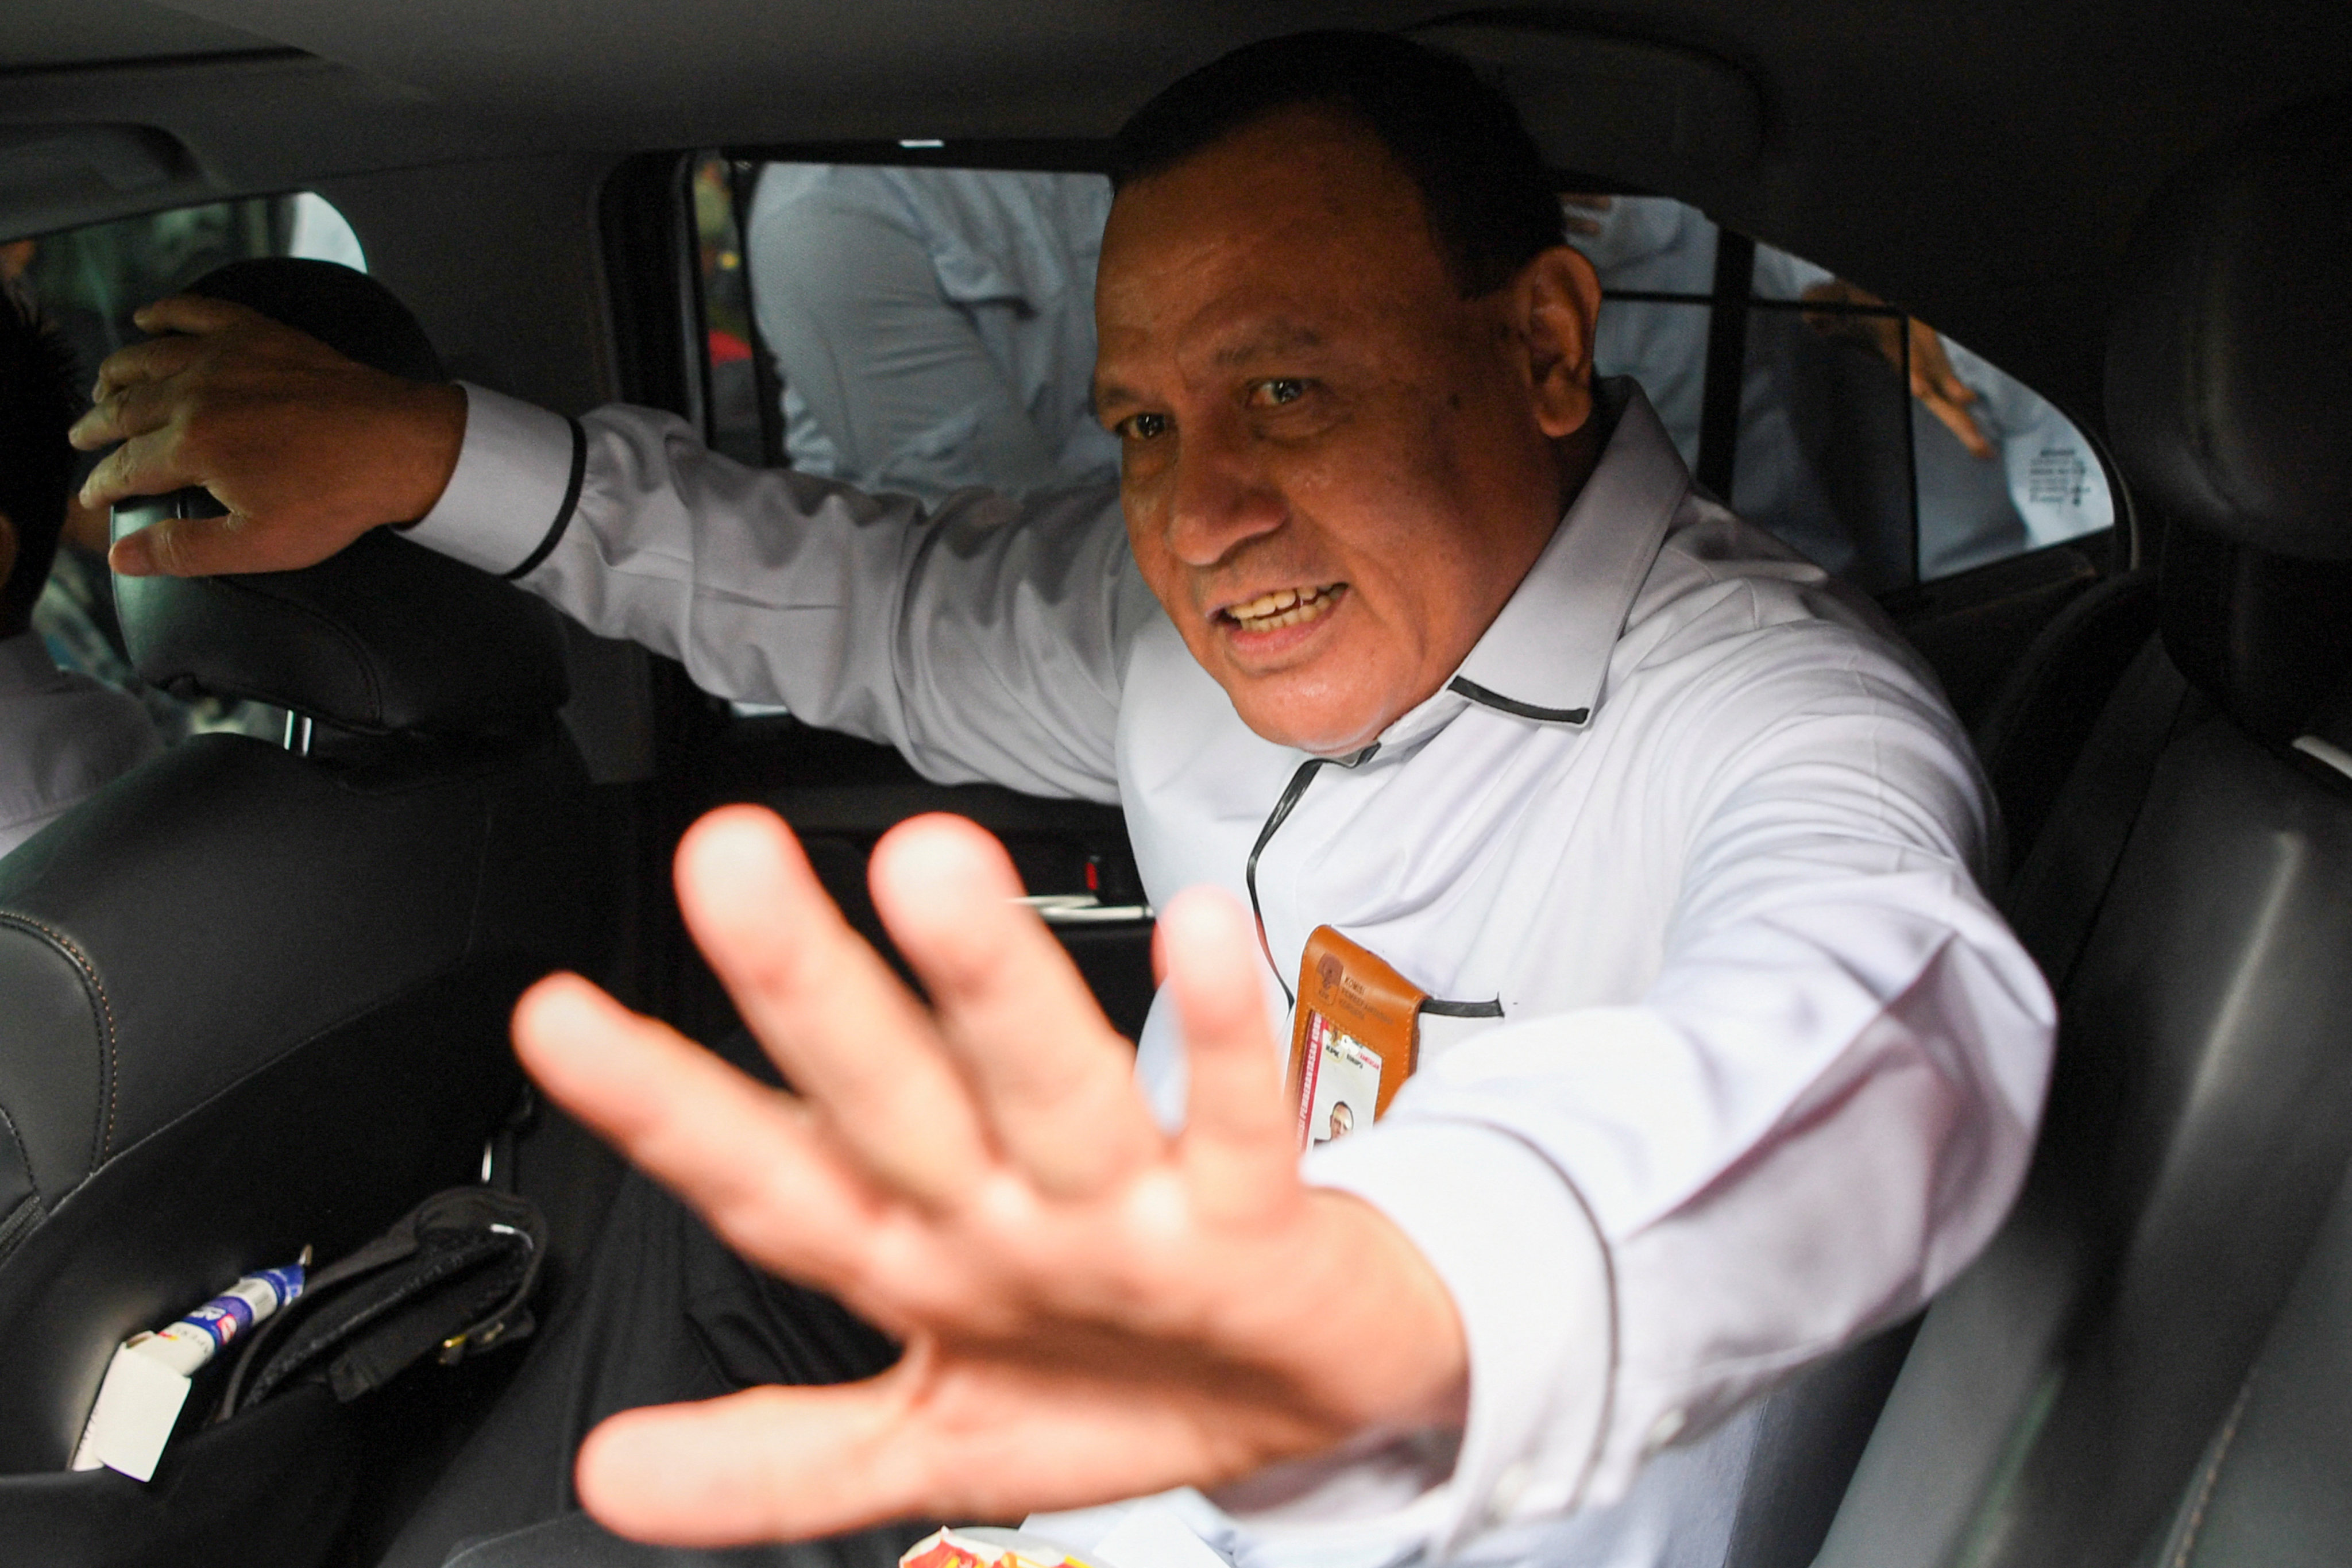 Firli Bahuri, chairman of the Corruption Eradication Commission, enters his car after responding to the summons at the KPK Anti-Corruption Education Center building in Jakarta. Photo: Reuters